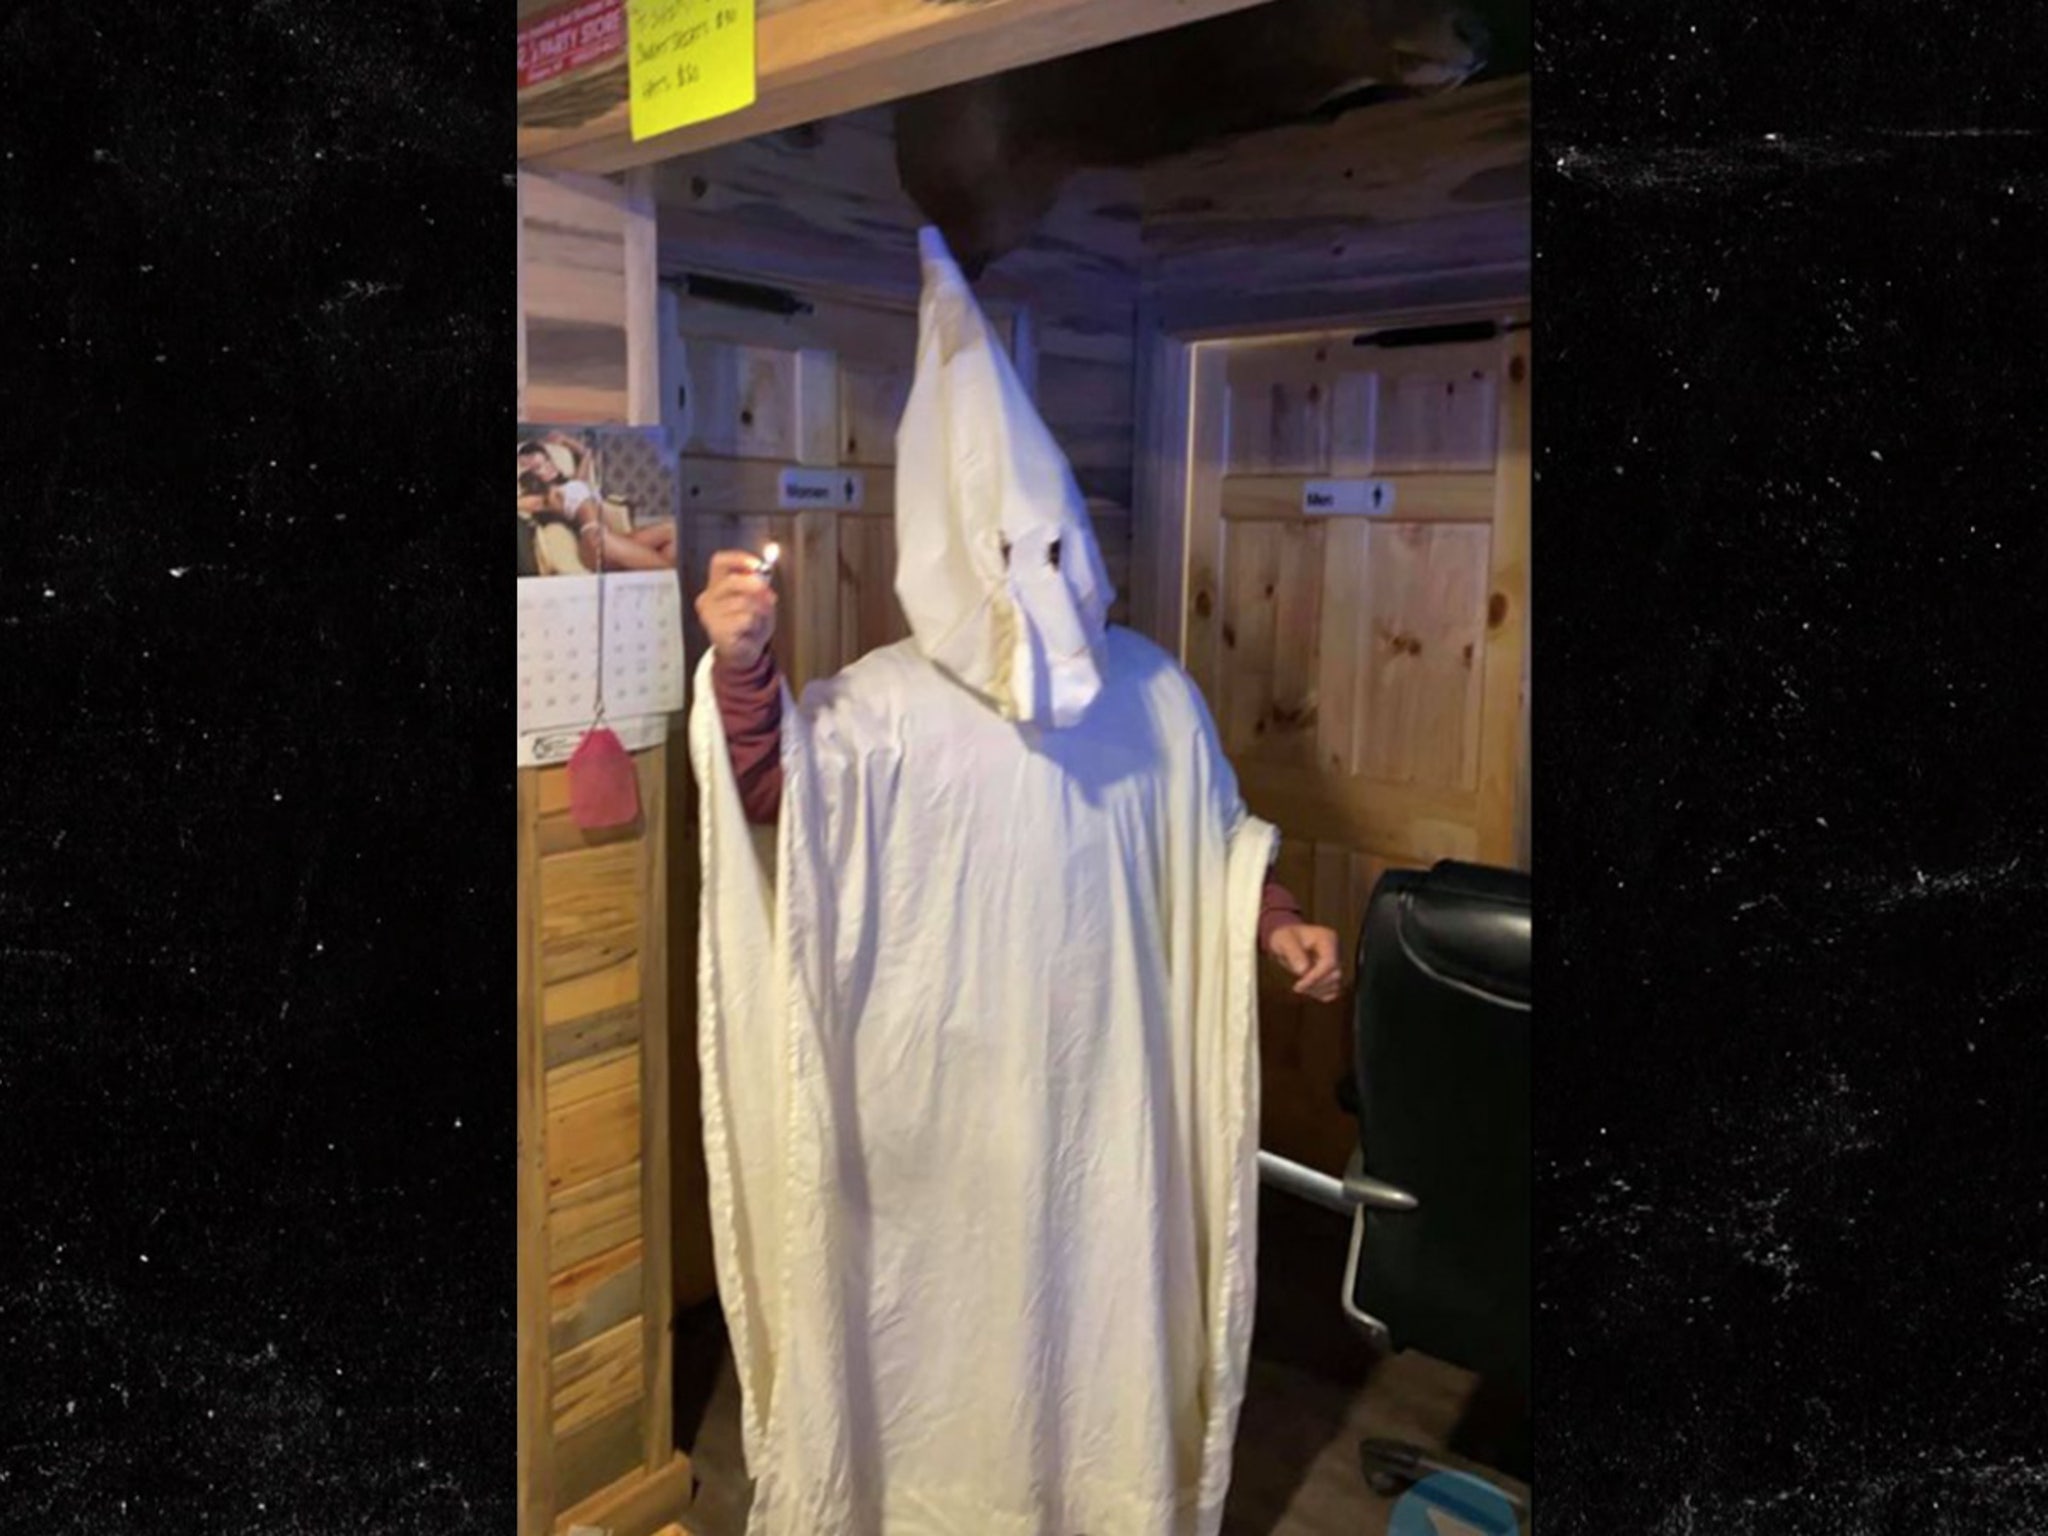 Man wearing KKK costume to Mississippi bar costume party thrown